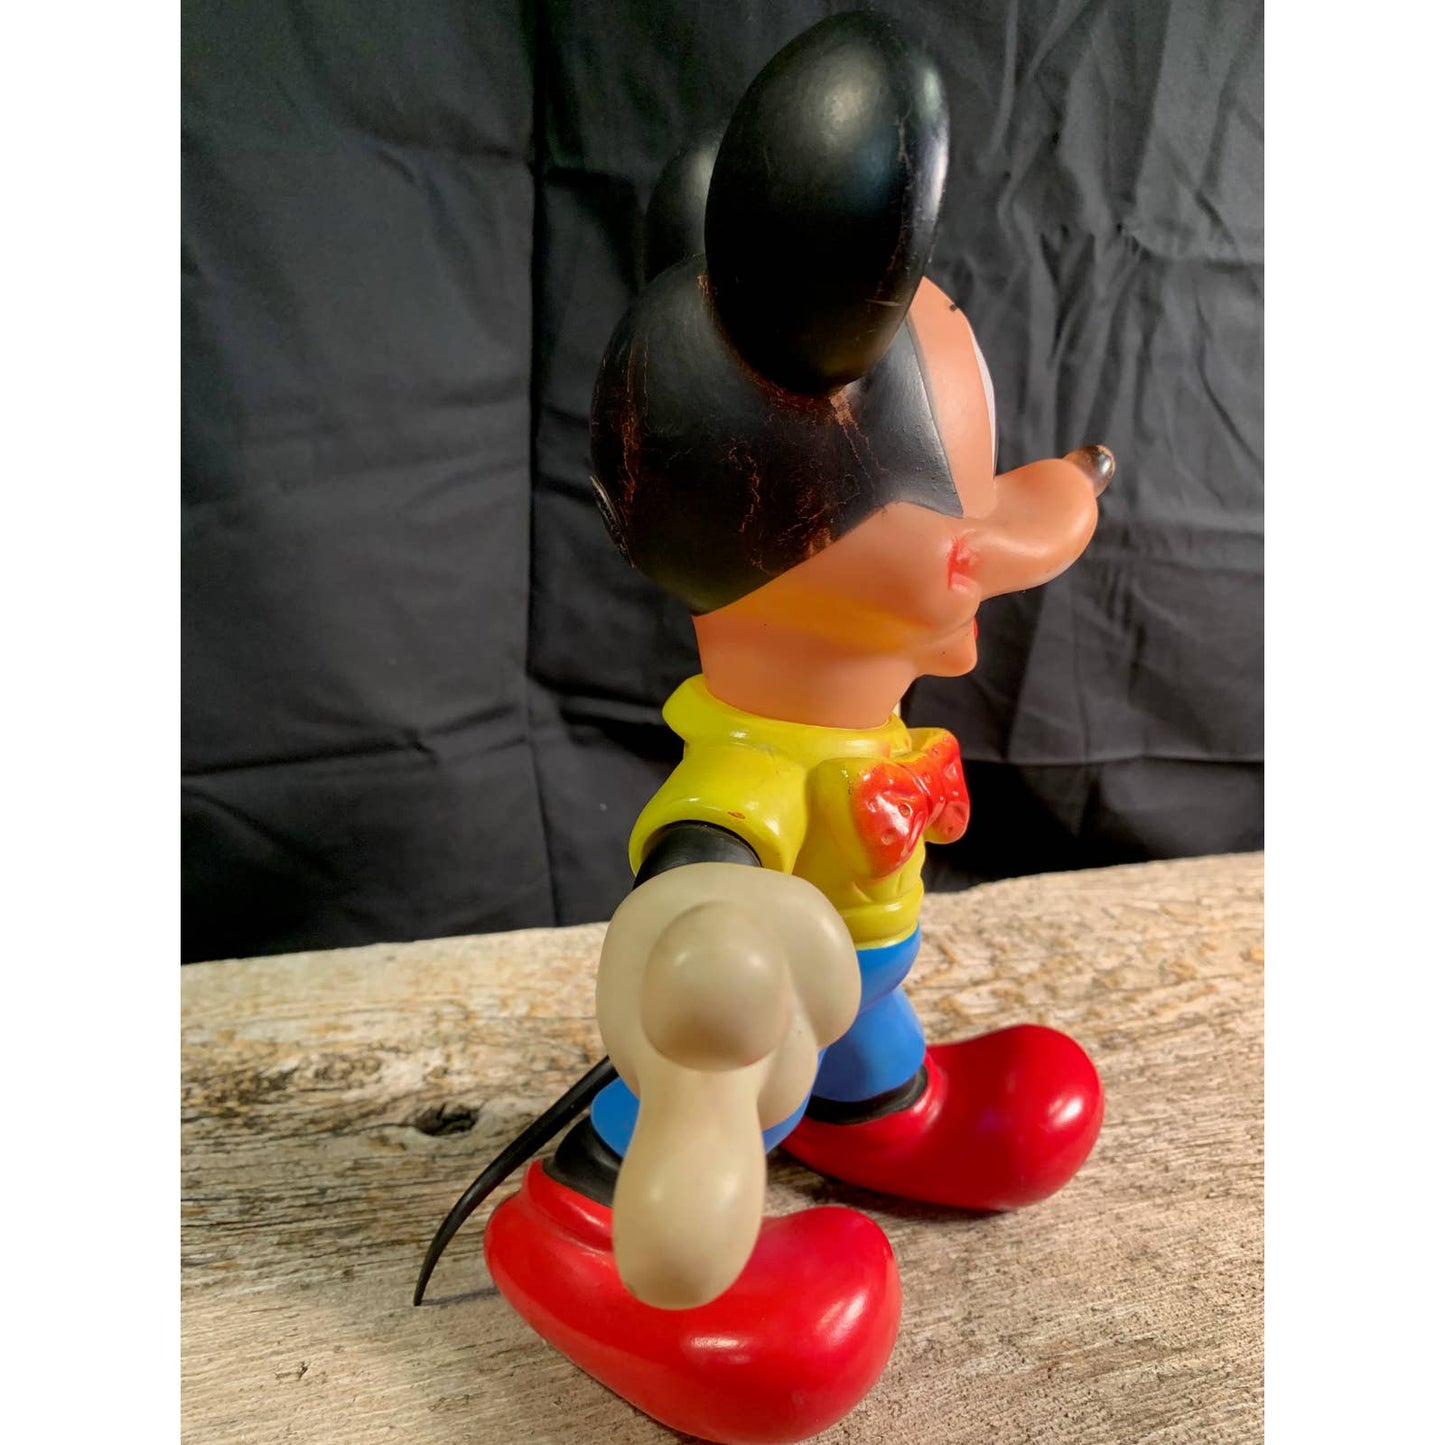 Mickey Mouse Vintage 1960s RARE Made in Italy Walt Disney Productions with tail